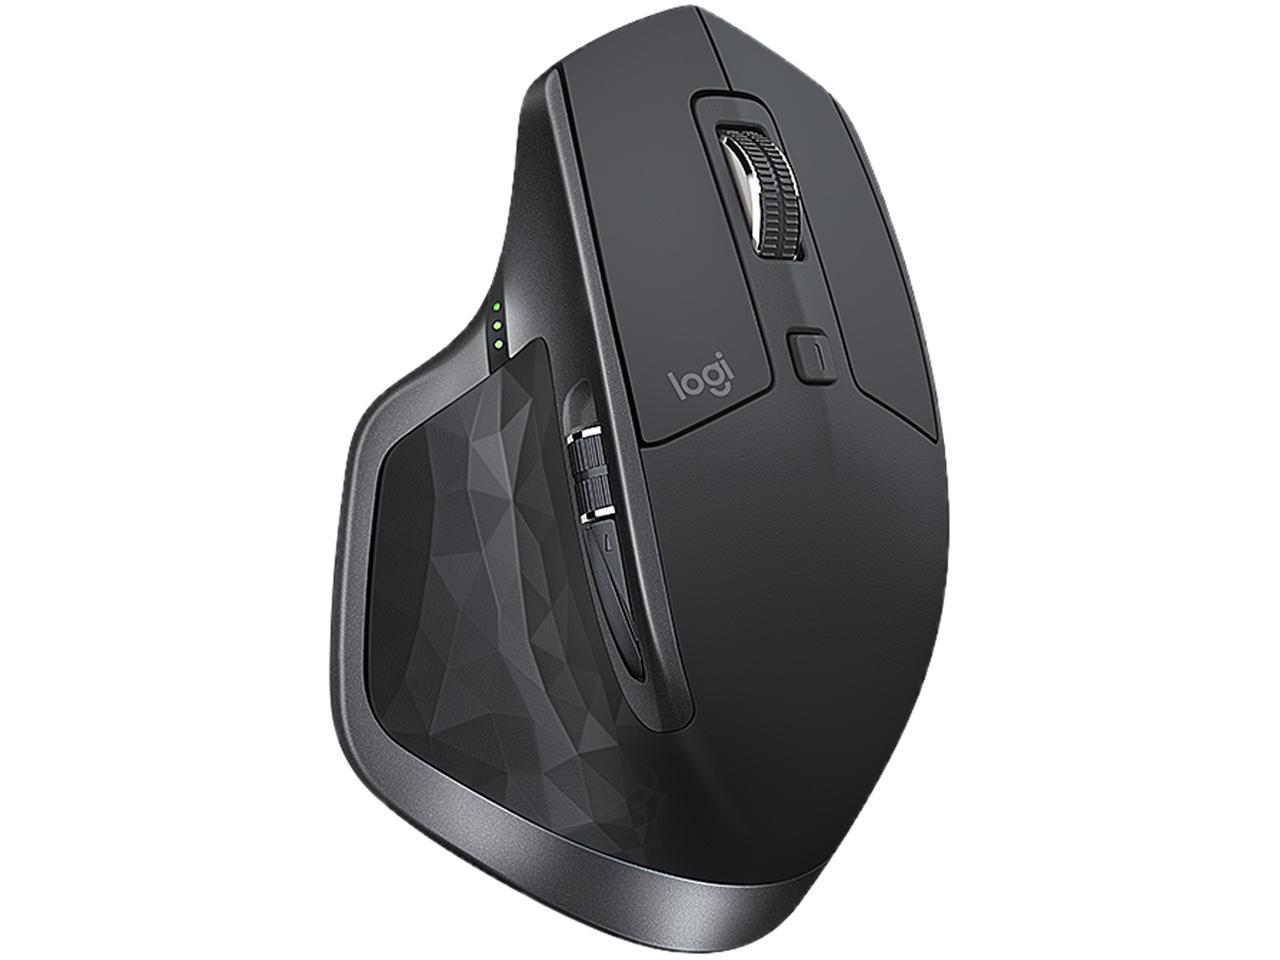 prøve Supersonic hastighed kravle Logitech MX Master 2S Wireless Mouse with FLOW Cross-Computer Control and  File Sharing for PC and Mac - Newegg.com